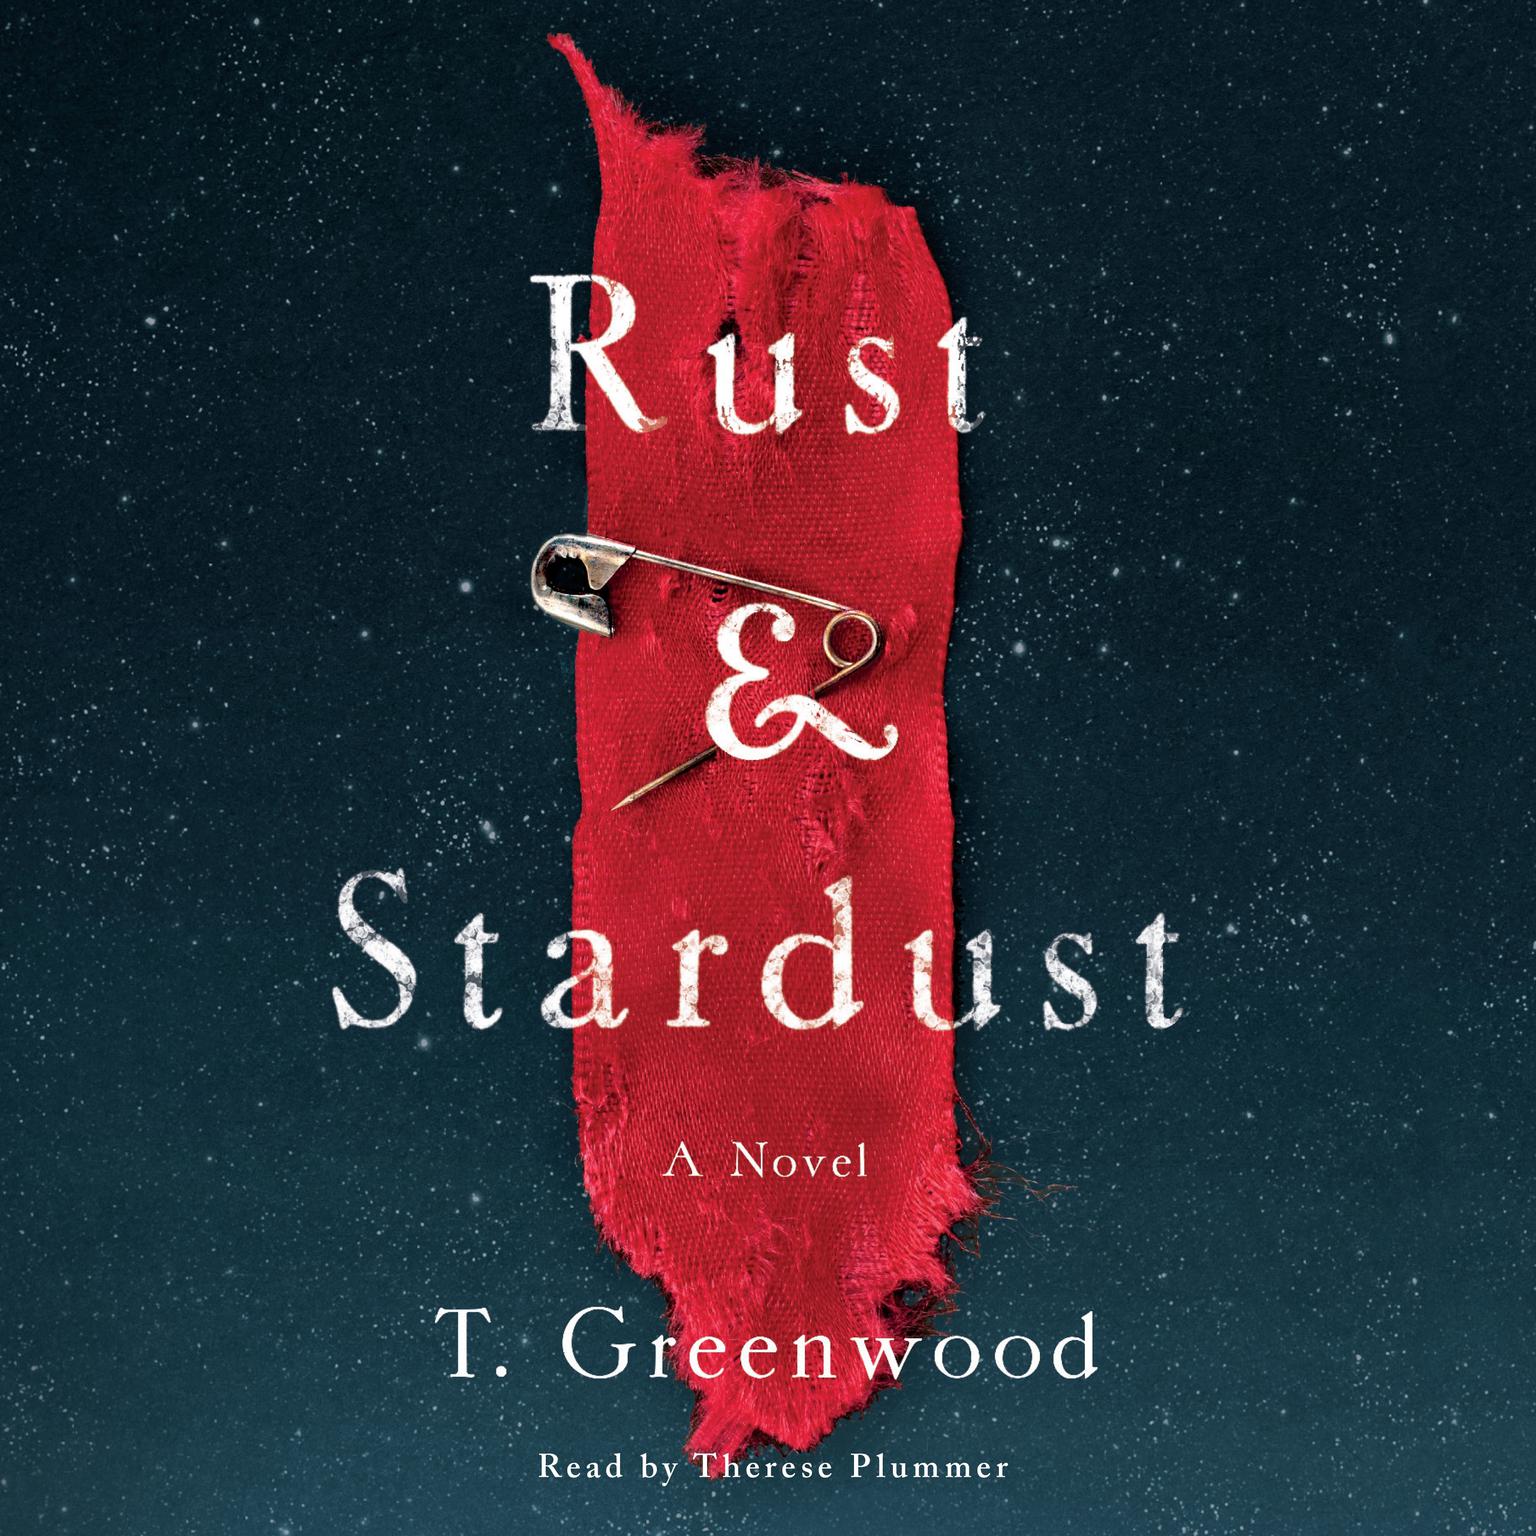 Rust & Stardust: A Novel Audiobook, by T. Greenwood